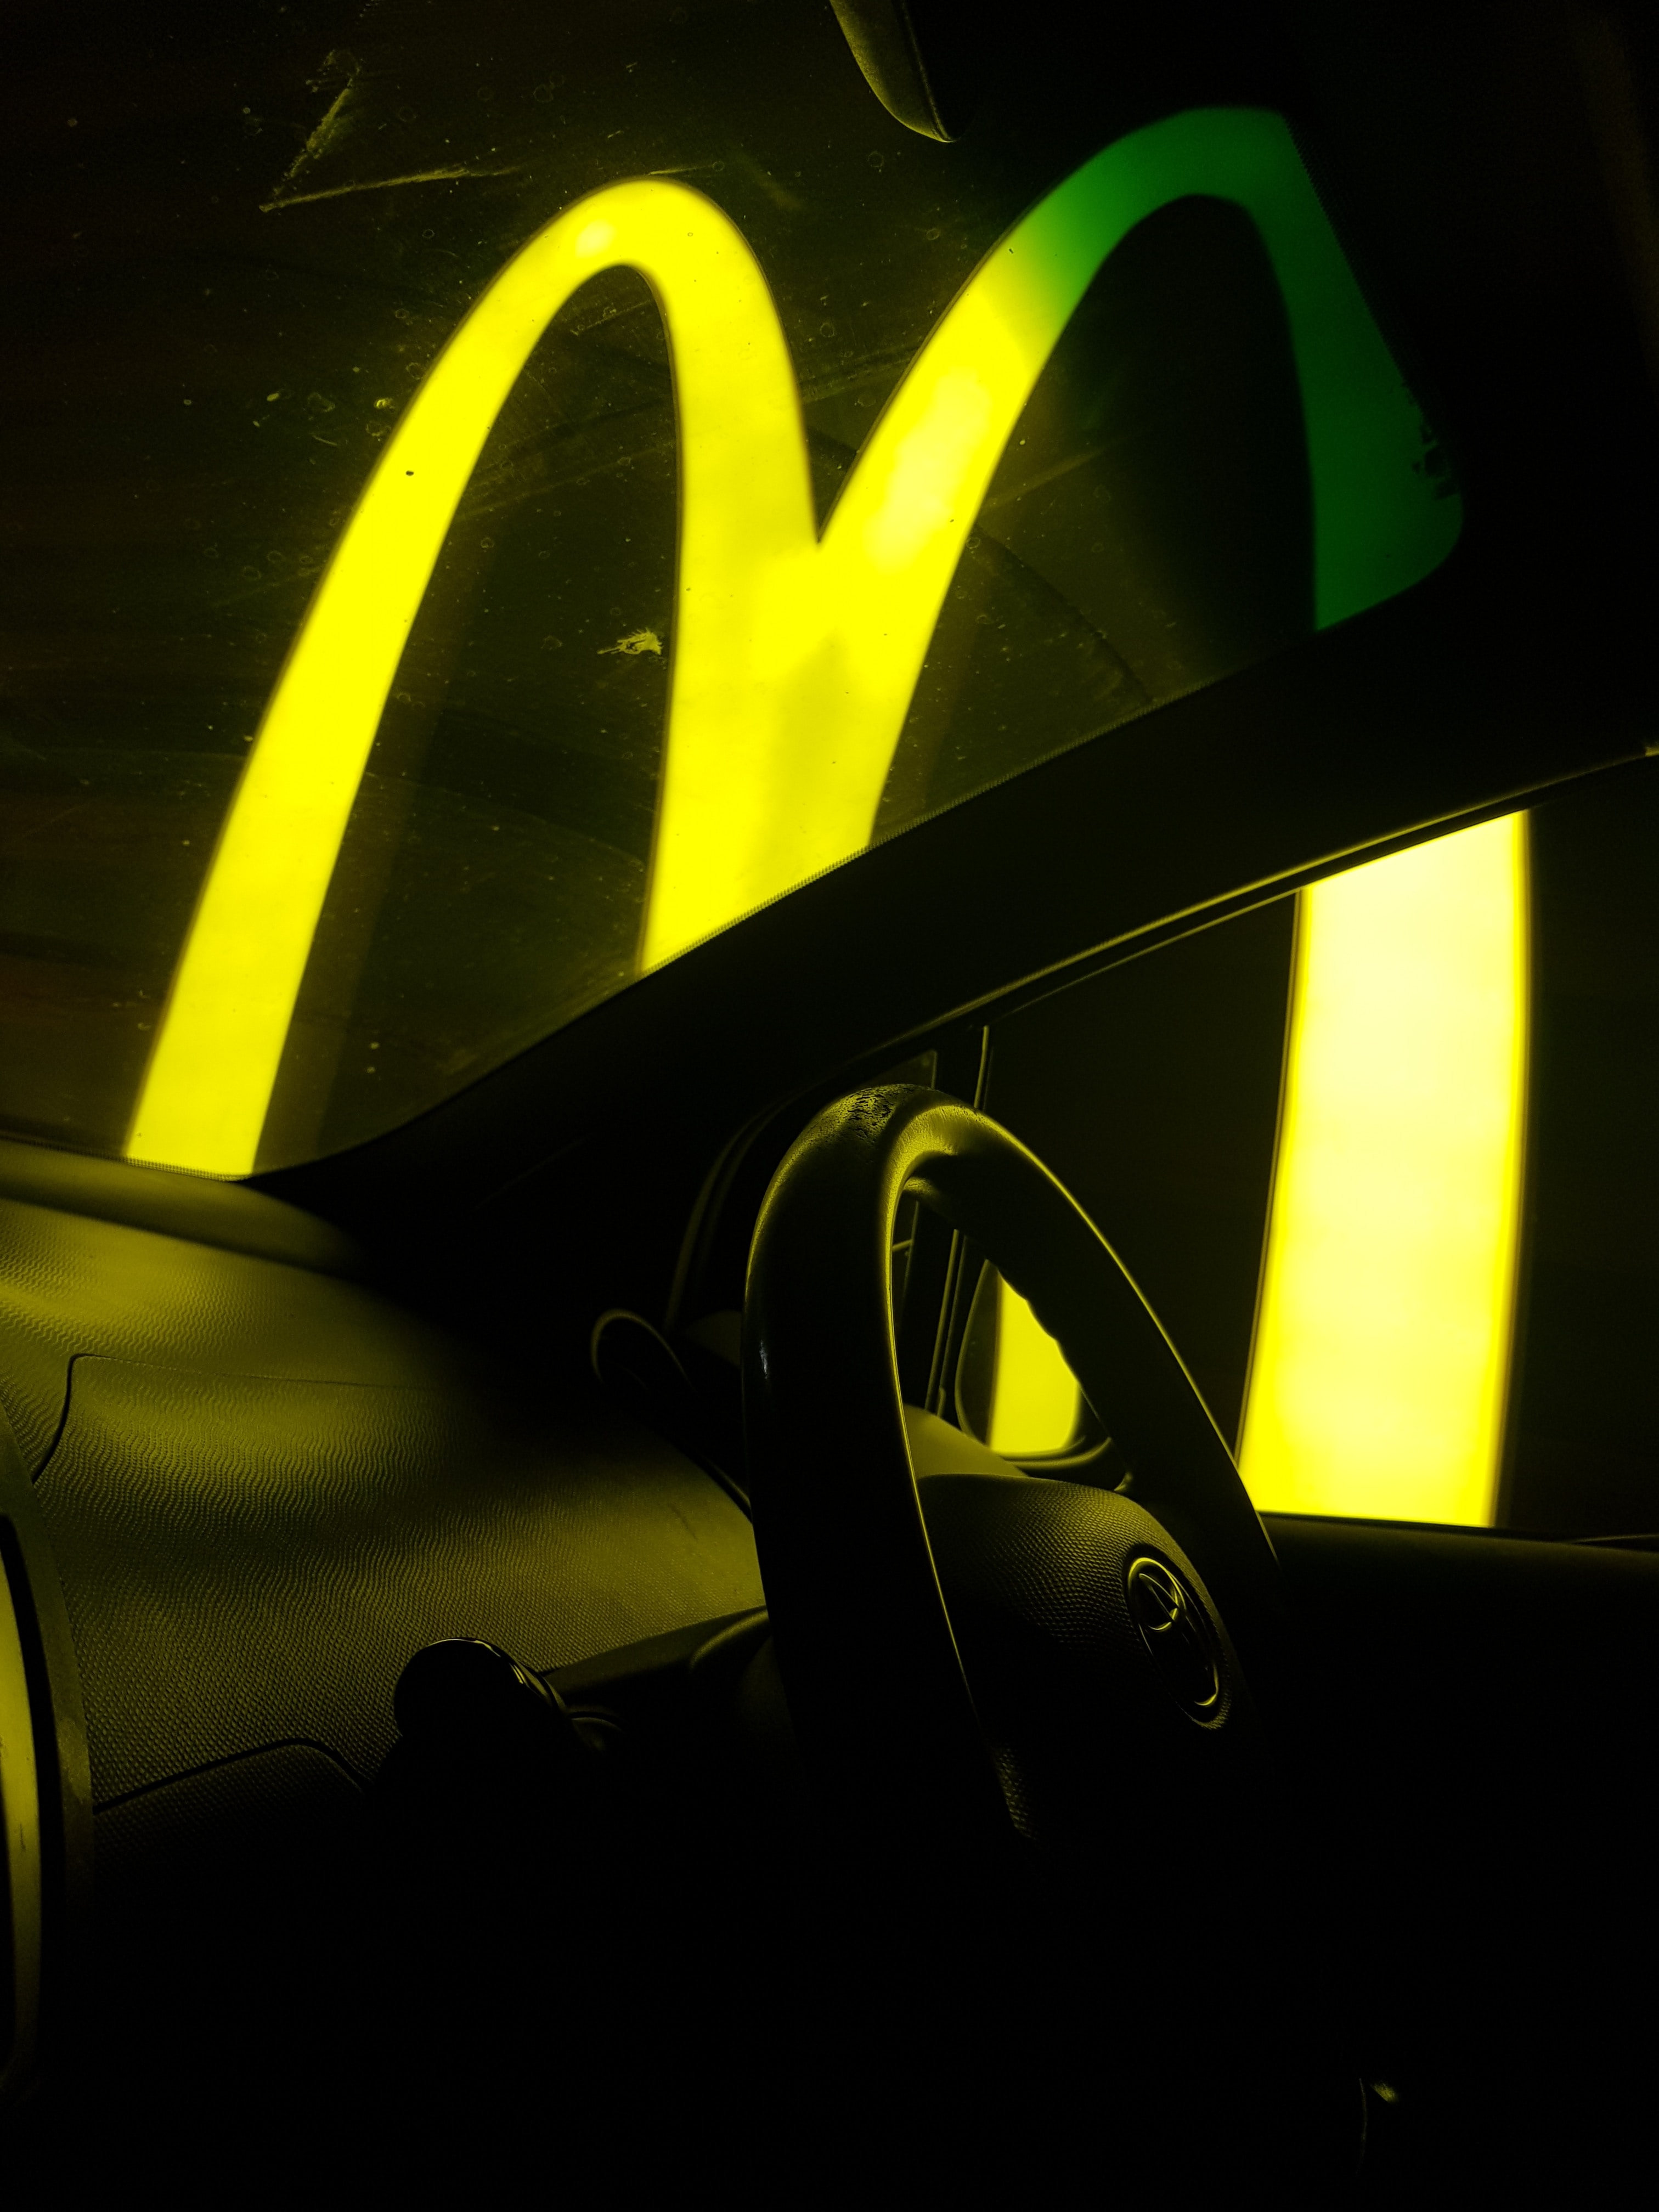 Supply Chain Scene, Image of McDonalds Golden Arches at night 